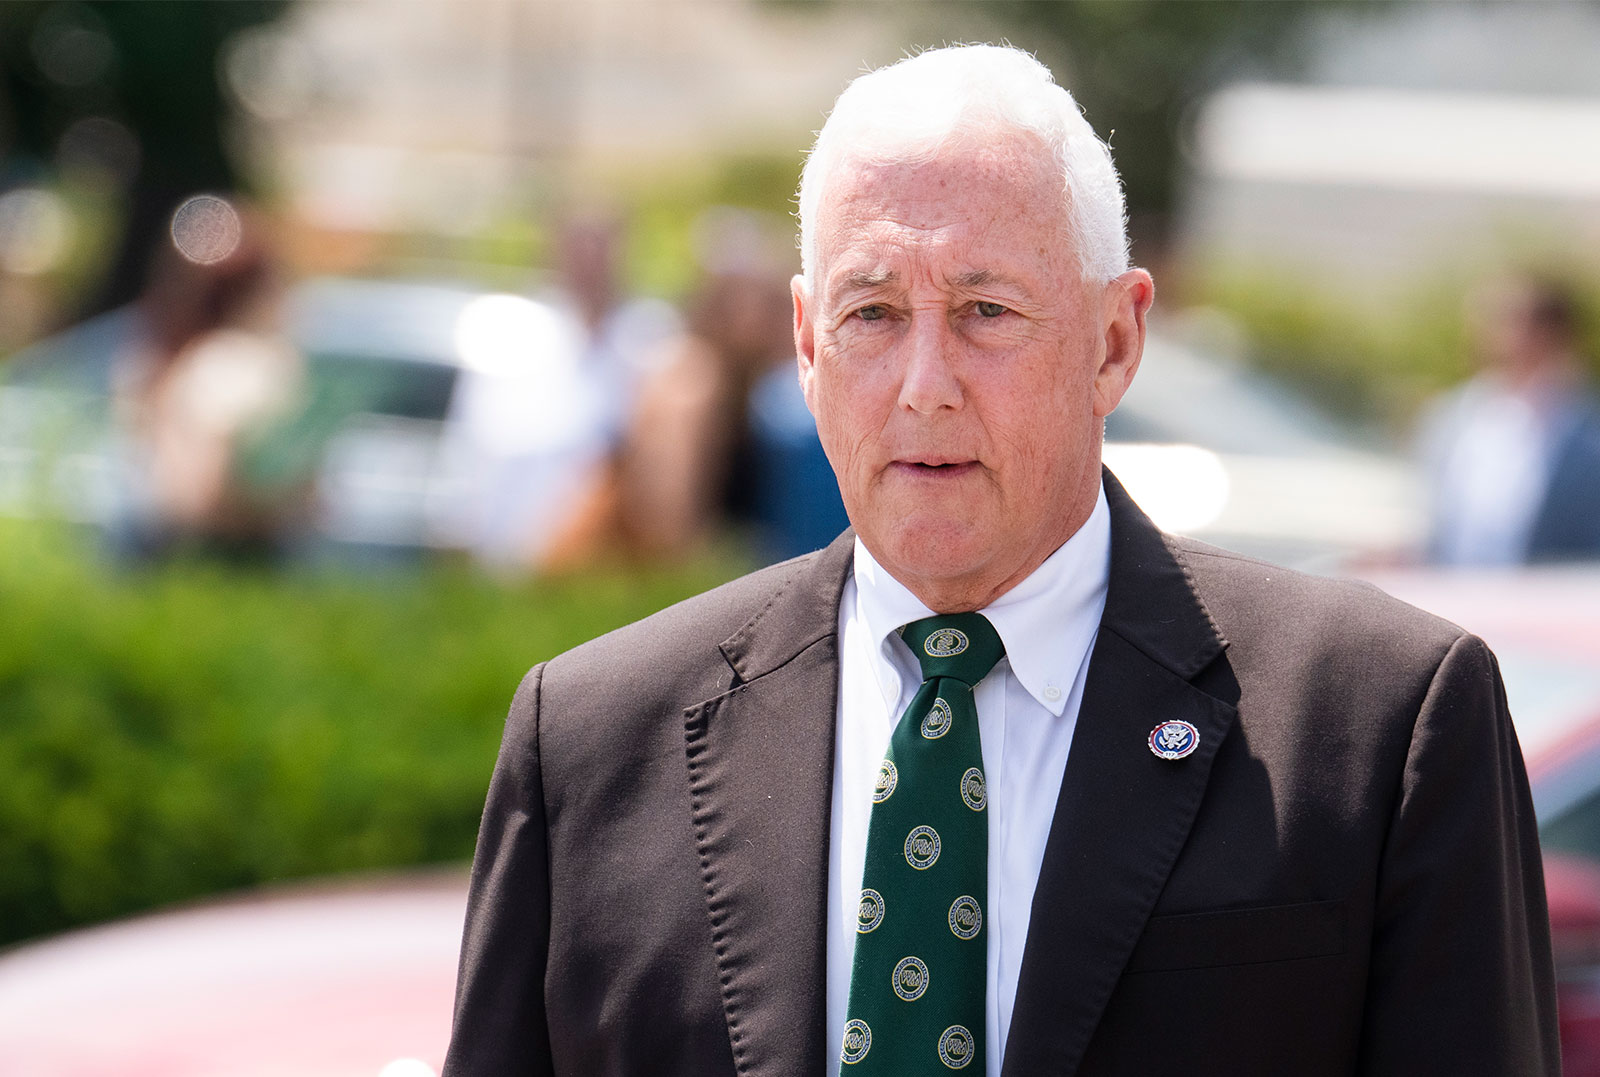 Rep. Greg Pence is seen at the US Capitol during the last votes of the week on June 16.